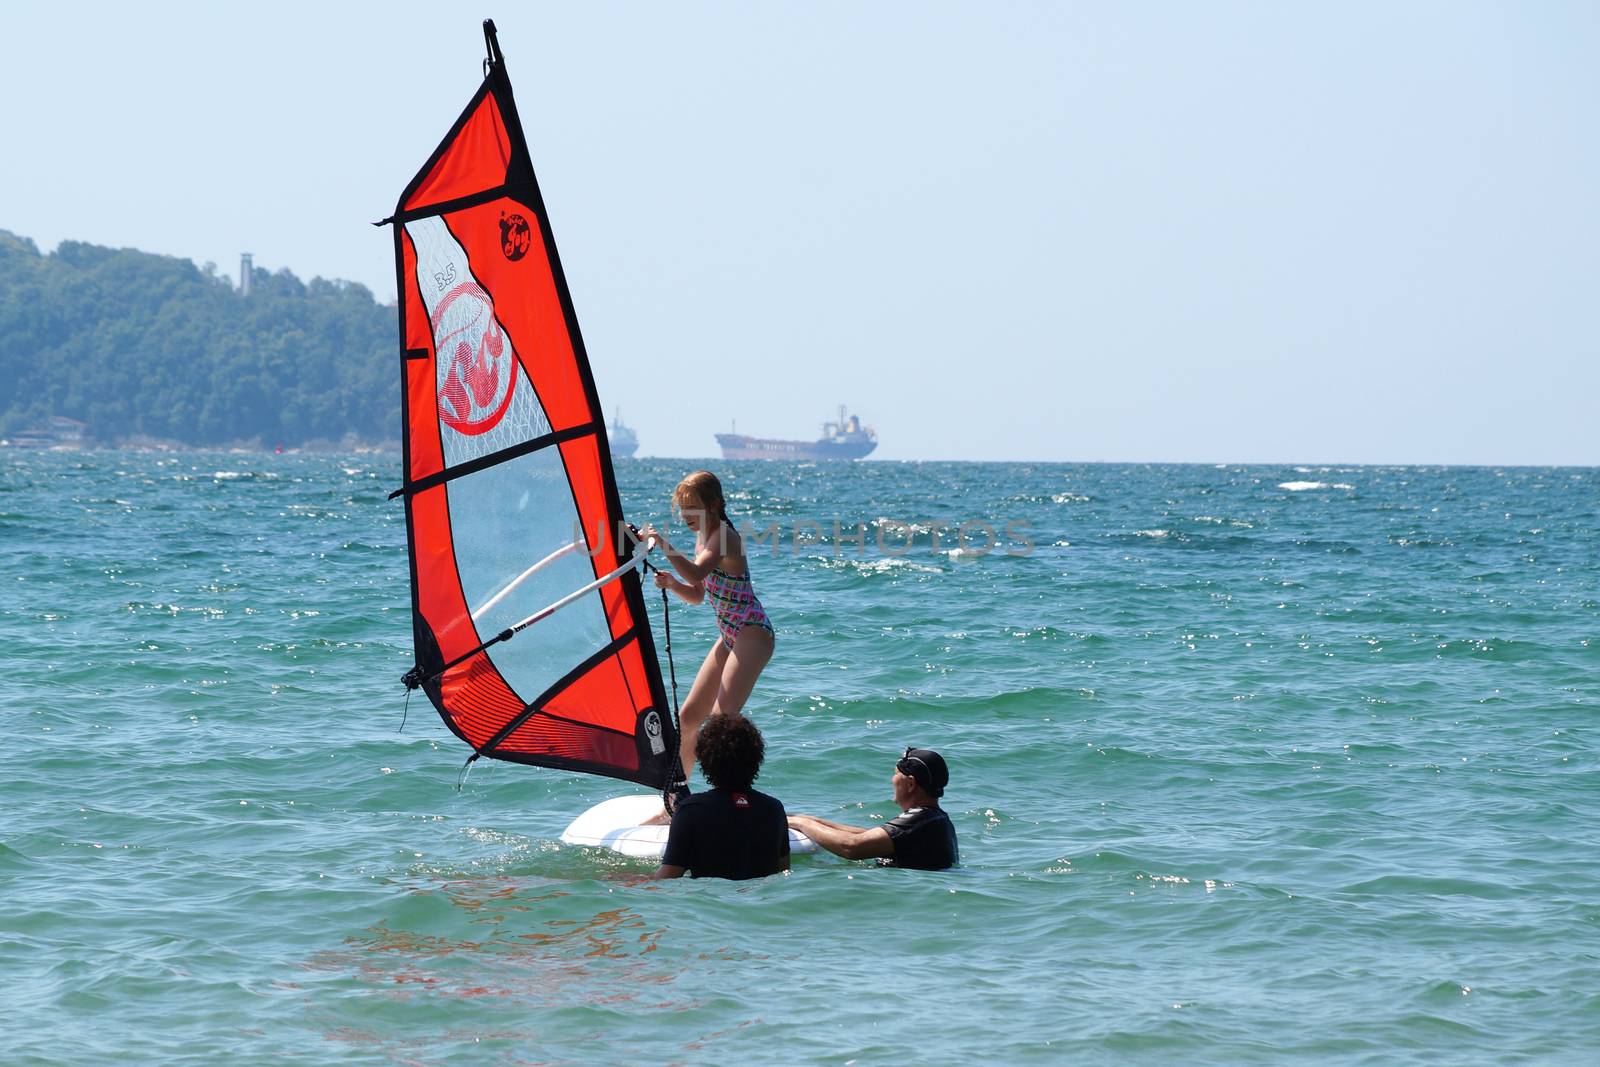 instructors teach the child to ride windsurfing by Annado